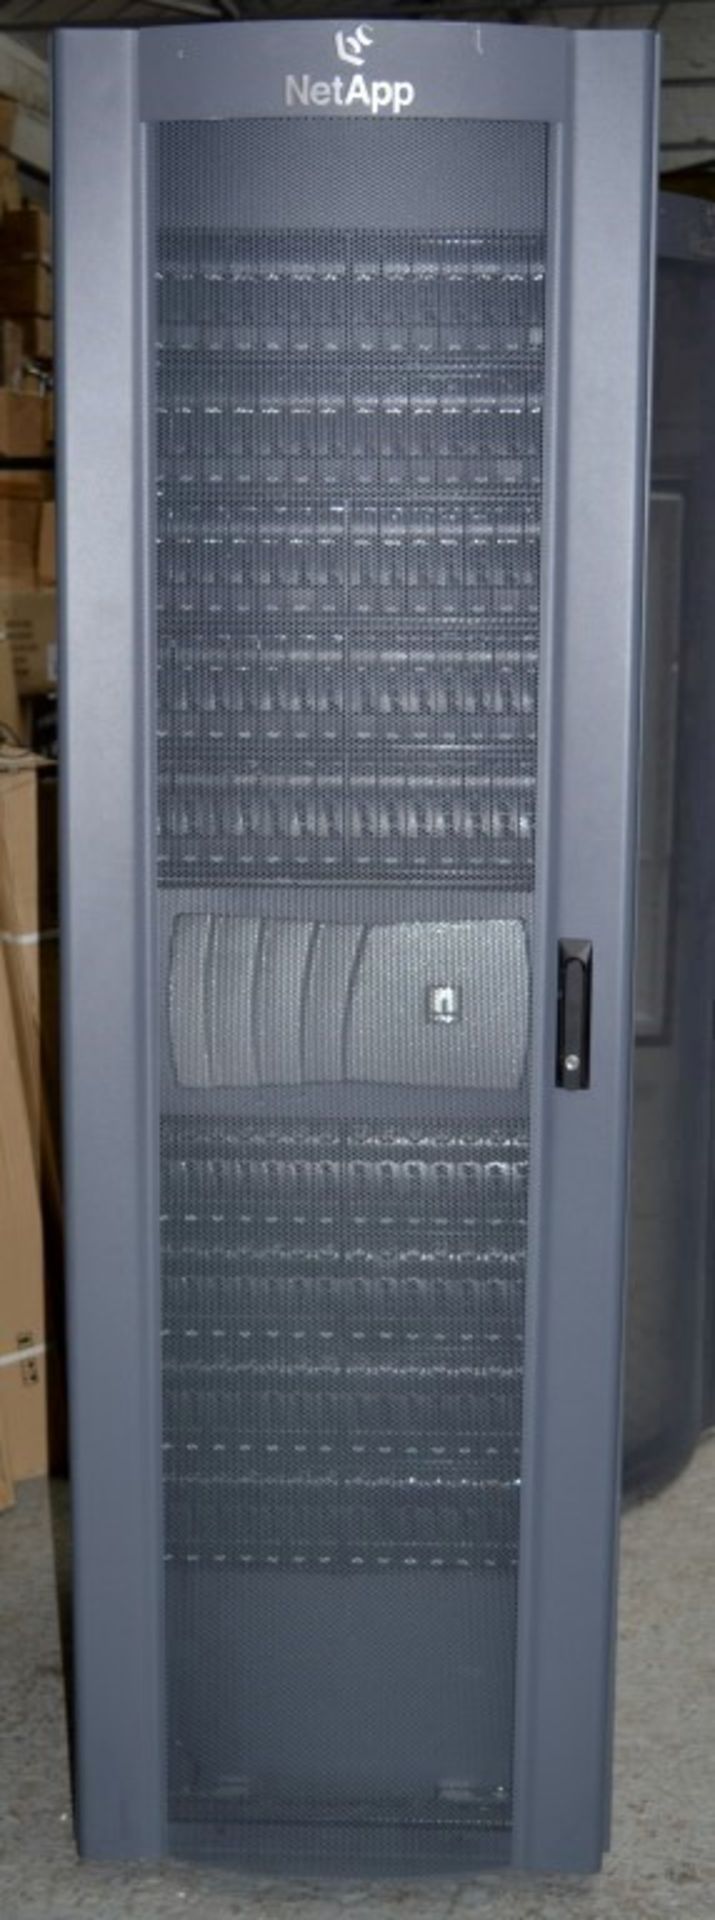 1 x Network Appliance Netapp Filer - Netapp Data Rack With 1 x FAS3140 Controller and 9 x DS14 MK2 - Image 8 of 23